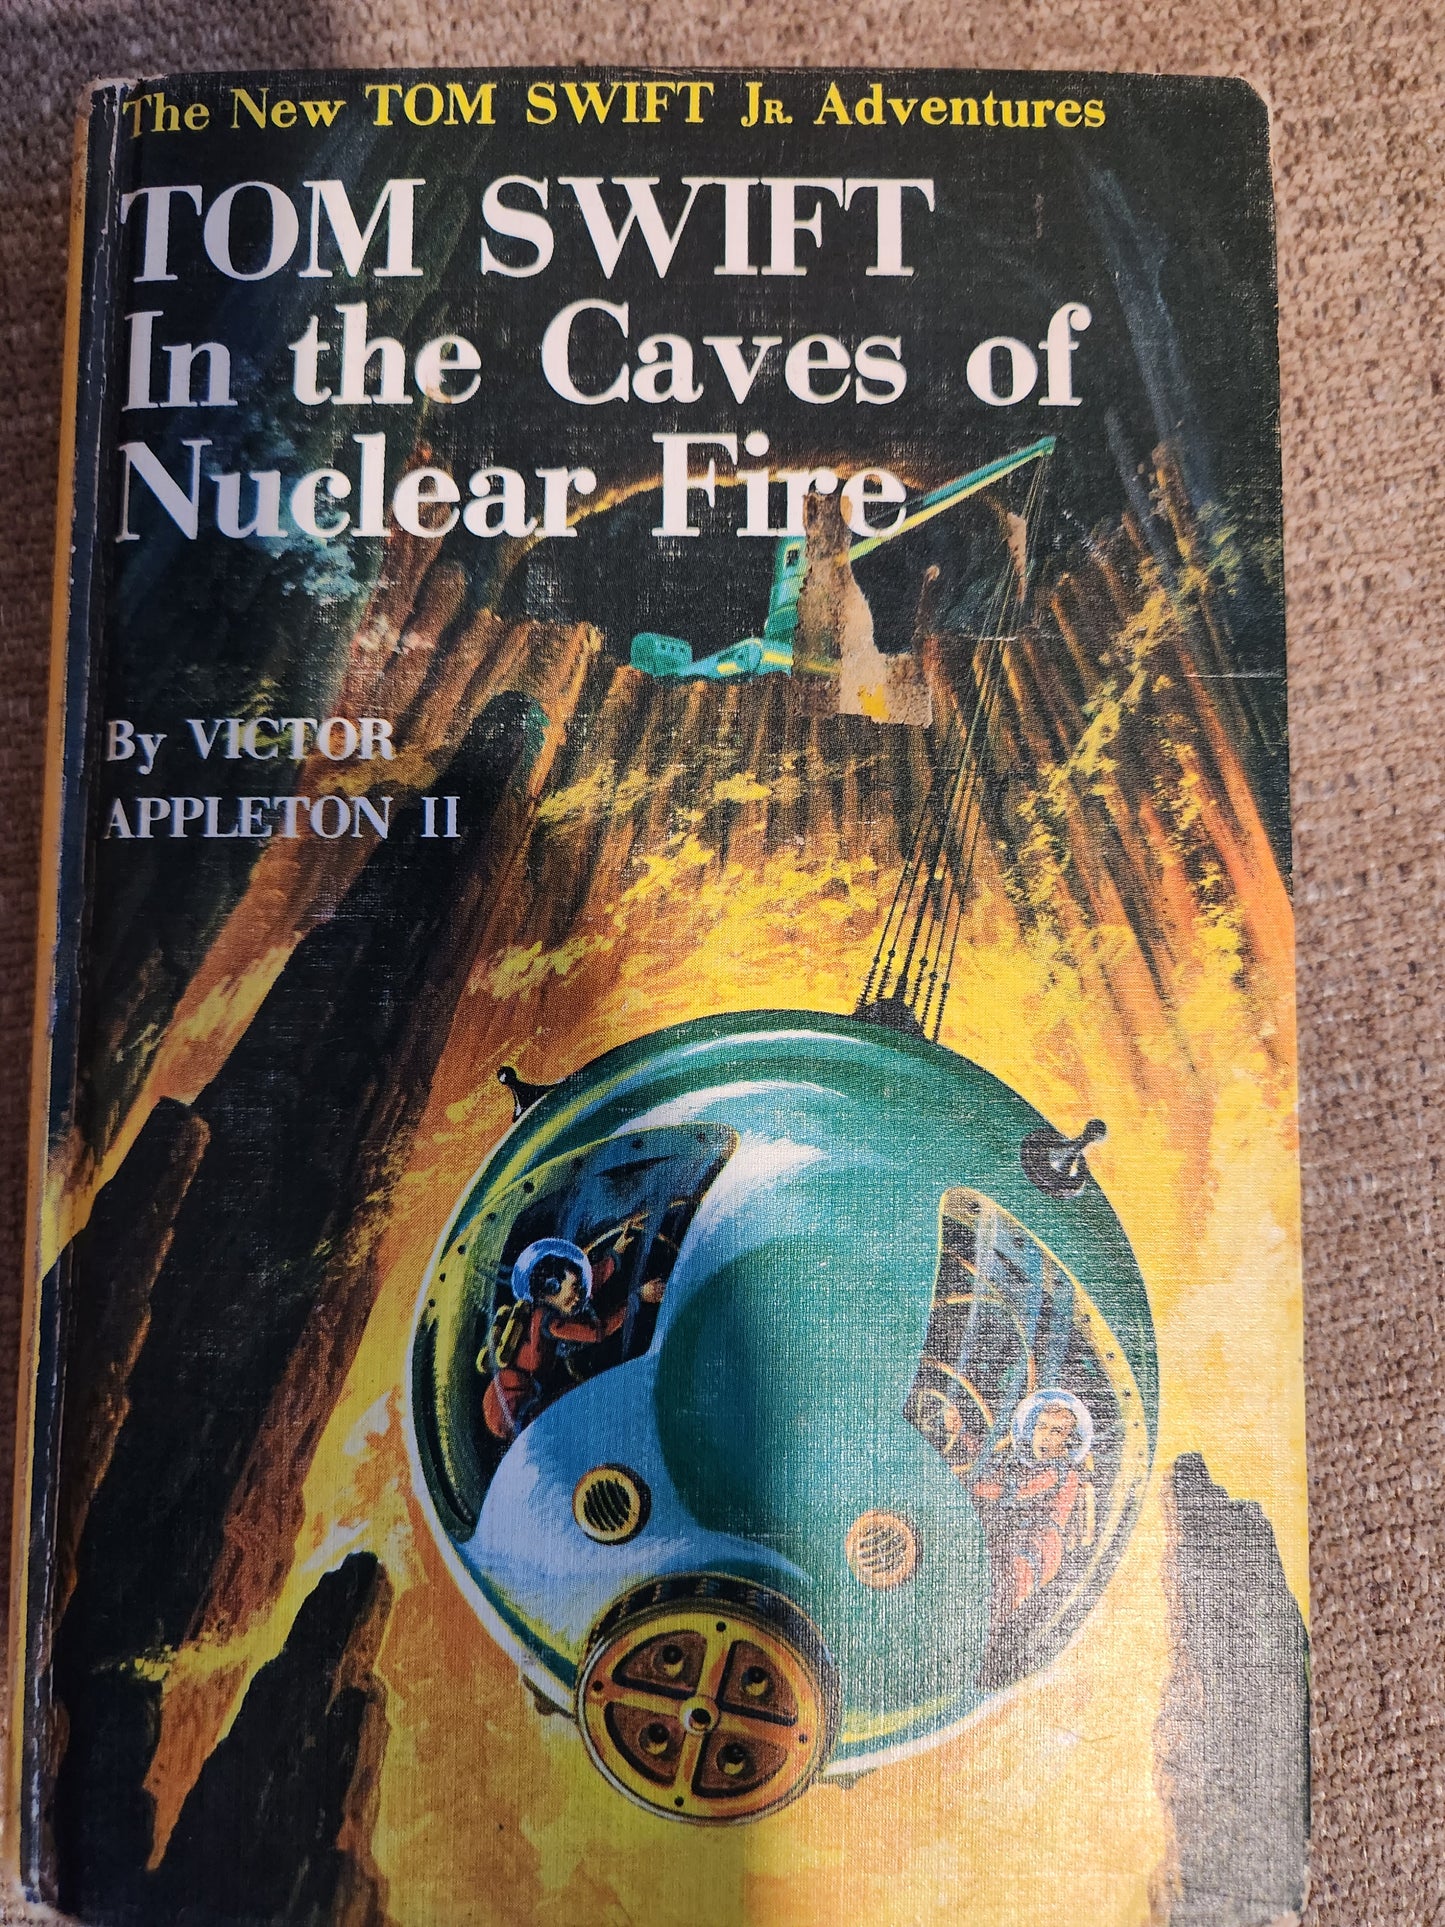 "Tom Swift In the Caves of Nuclear Fire" by Victor Appleton II (Blue Spine)(Yellow spine)